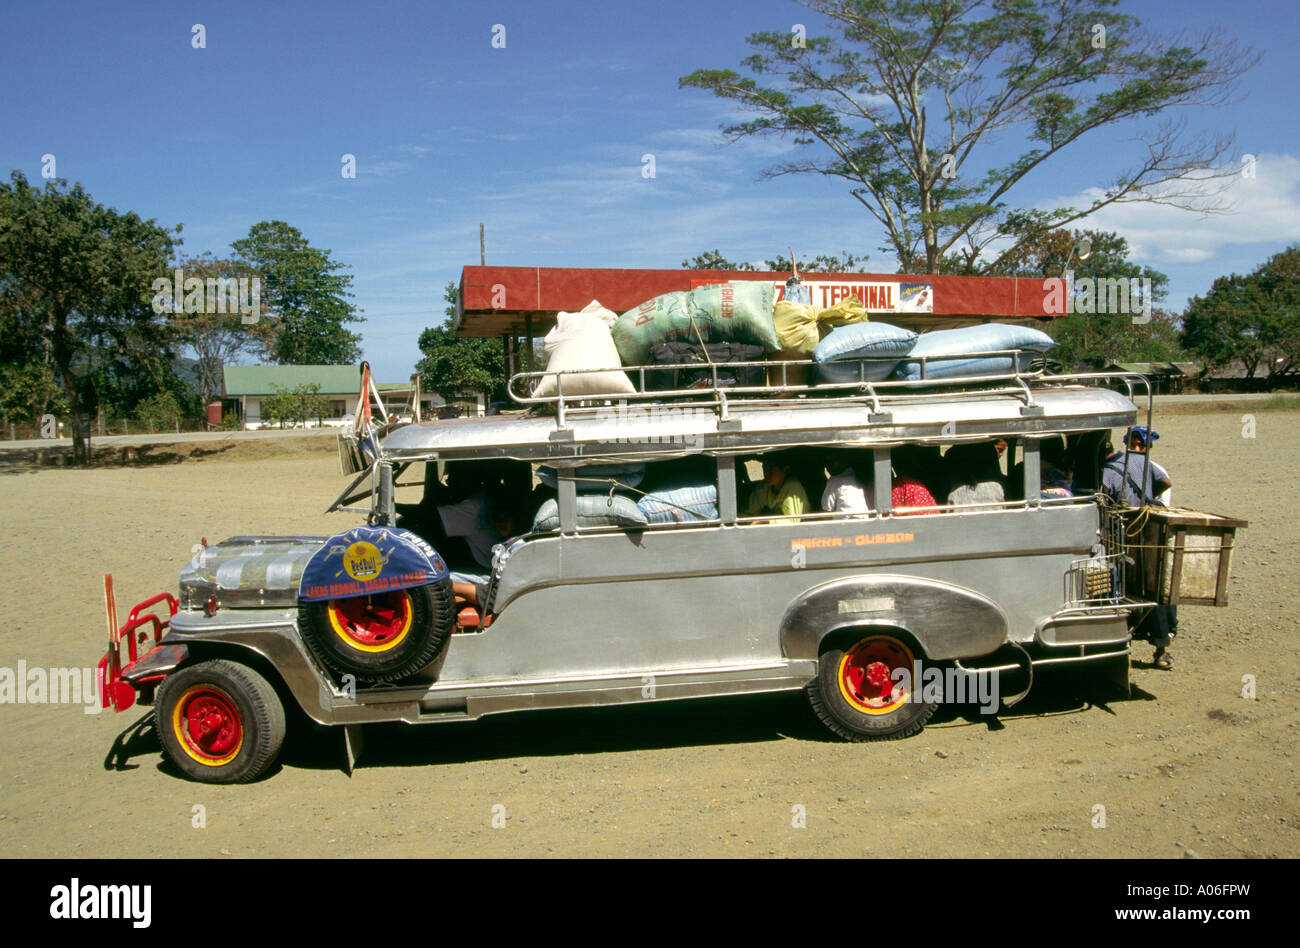 Philippines Palawan Quezon transport Jeepney in bus station Stock Photo